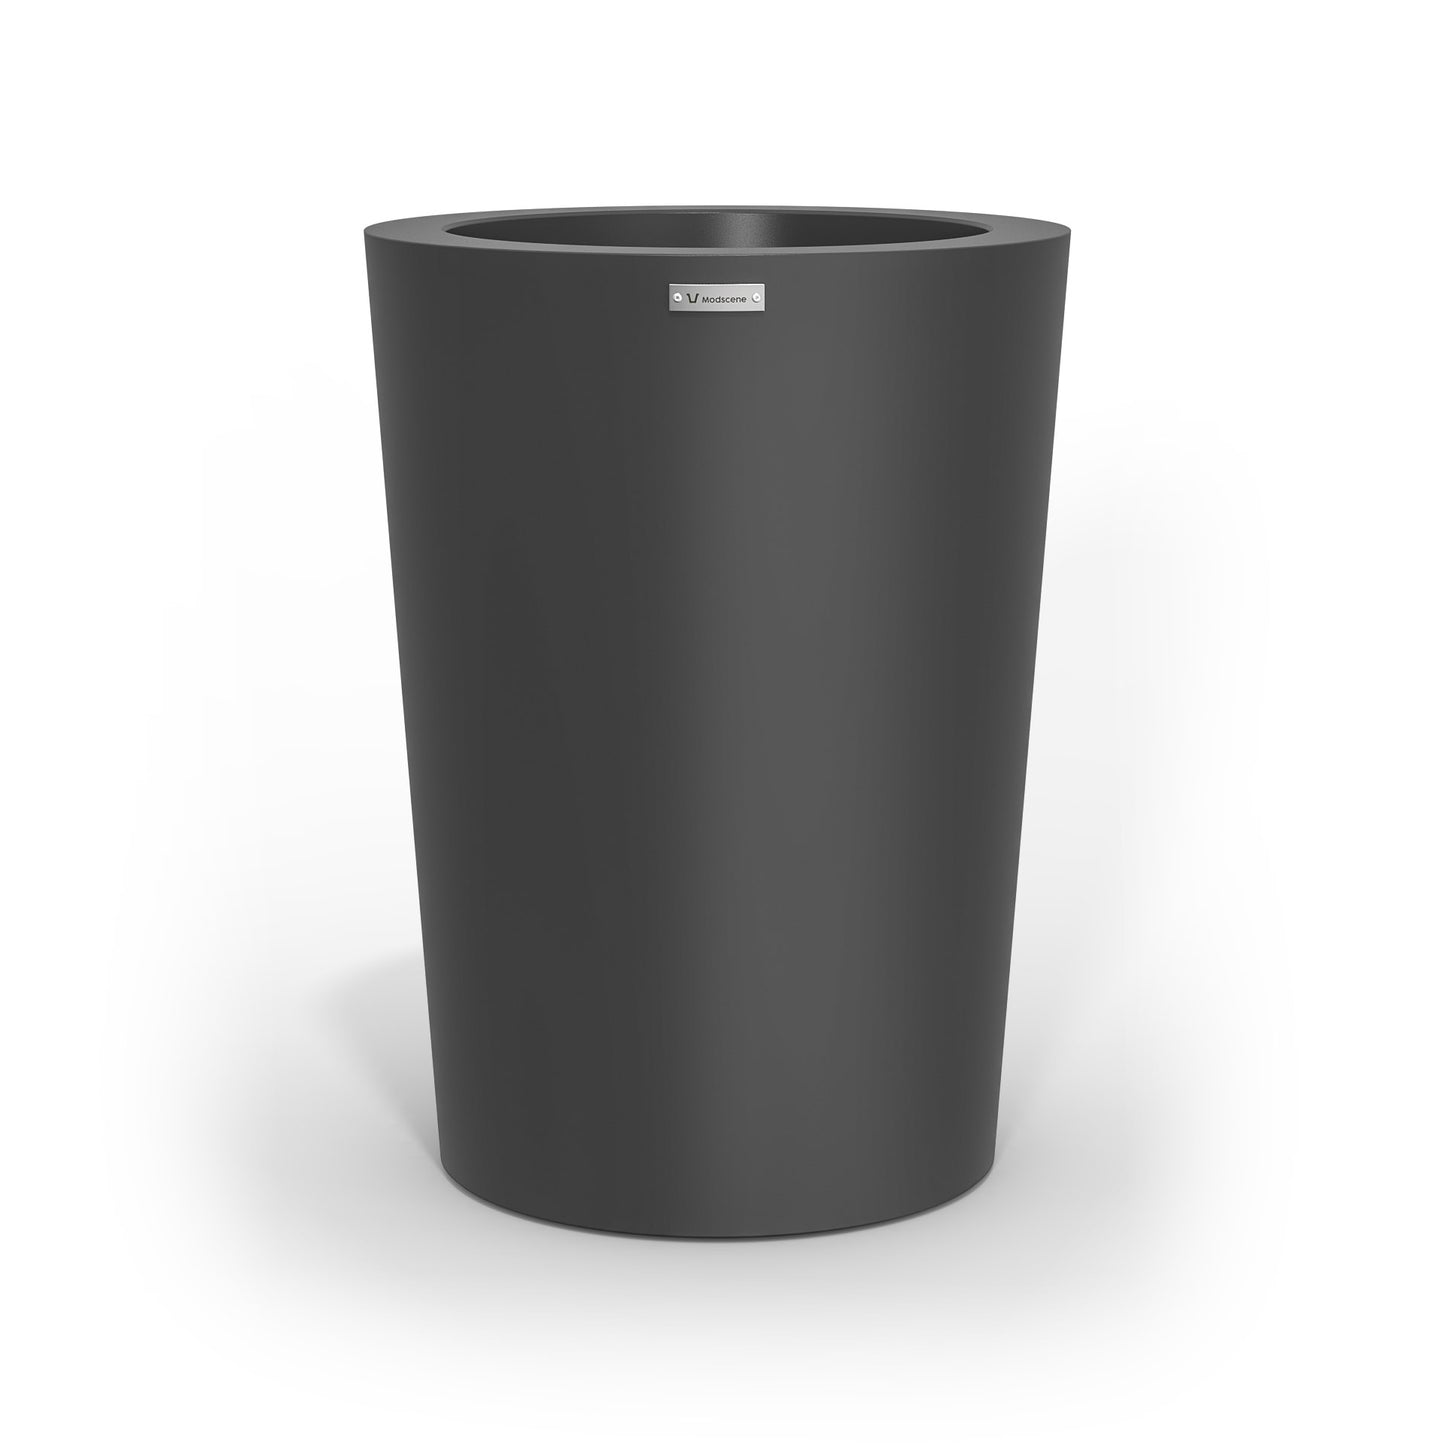 A modern style planter pot in a dark grey colour. Made by Modscene NZ.